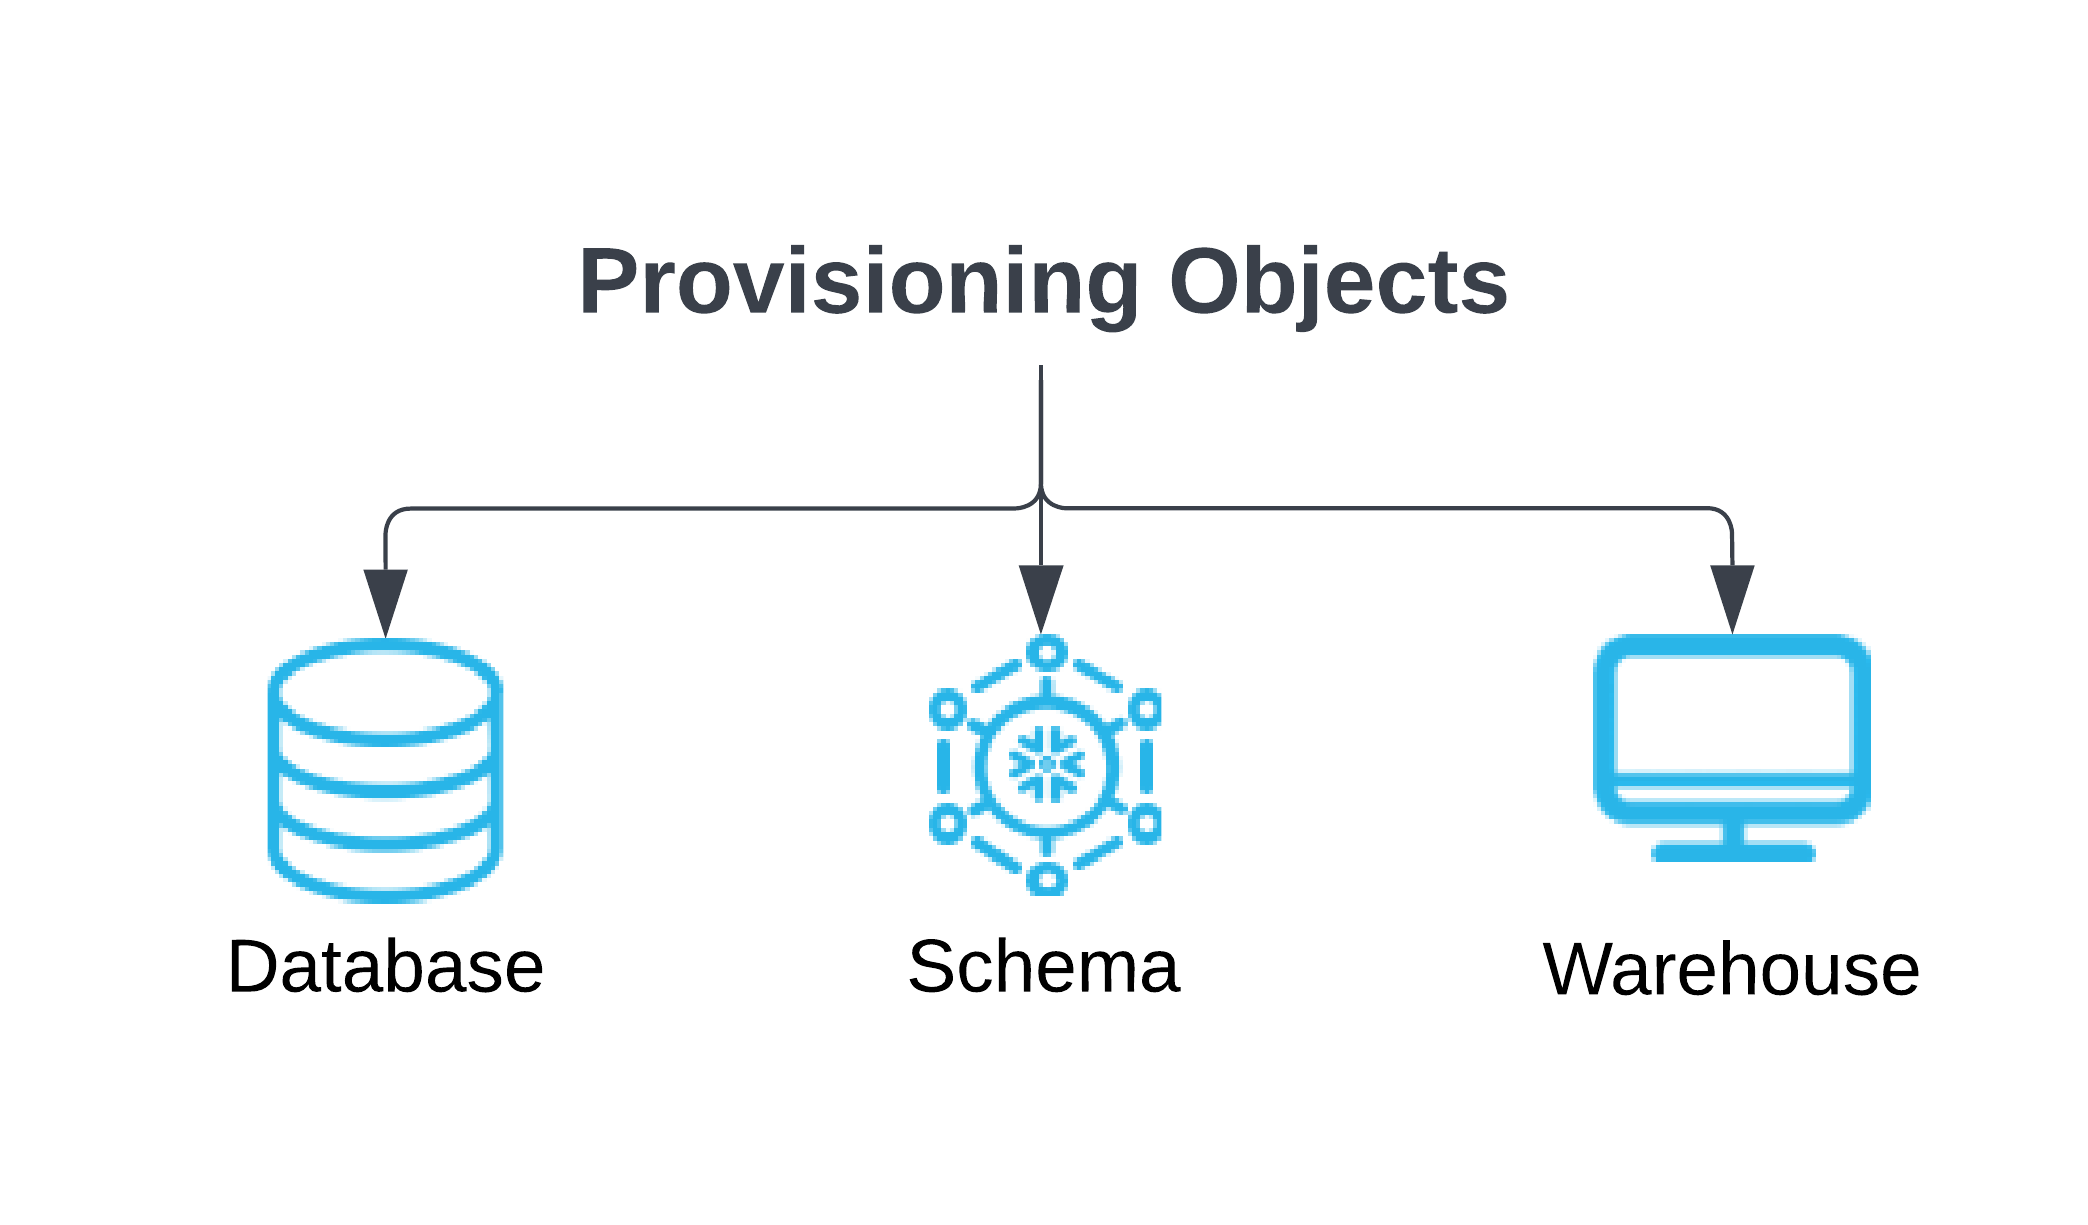 Provisioning of Database, Schema, and Warehouse Objects